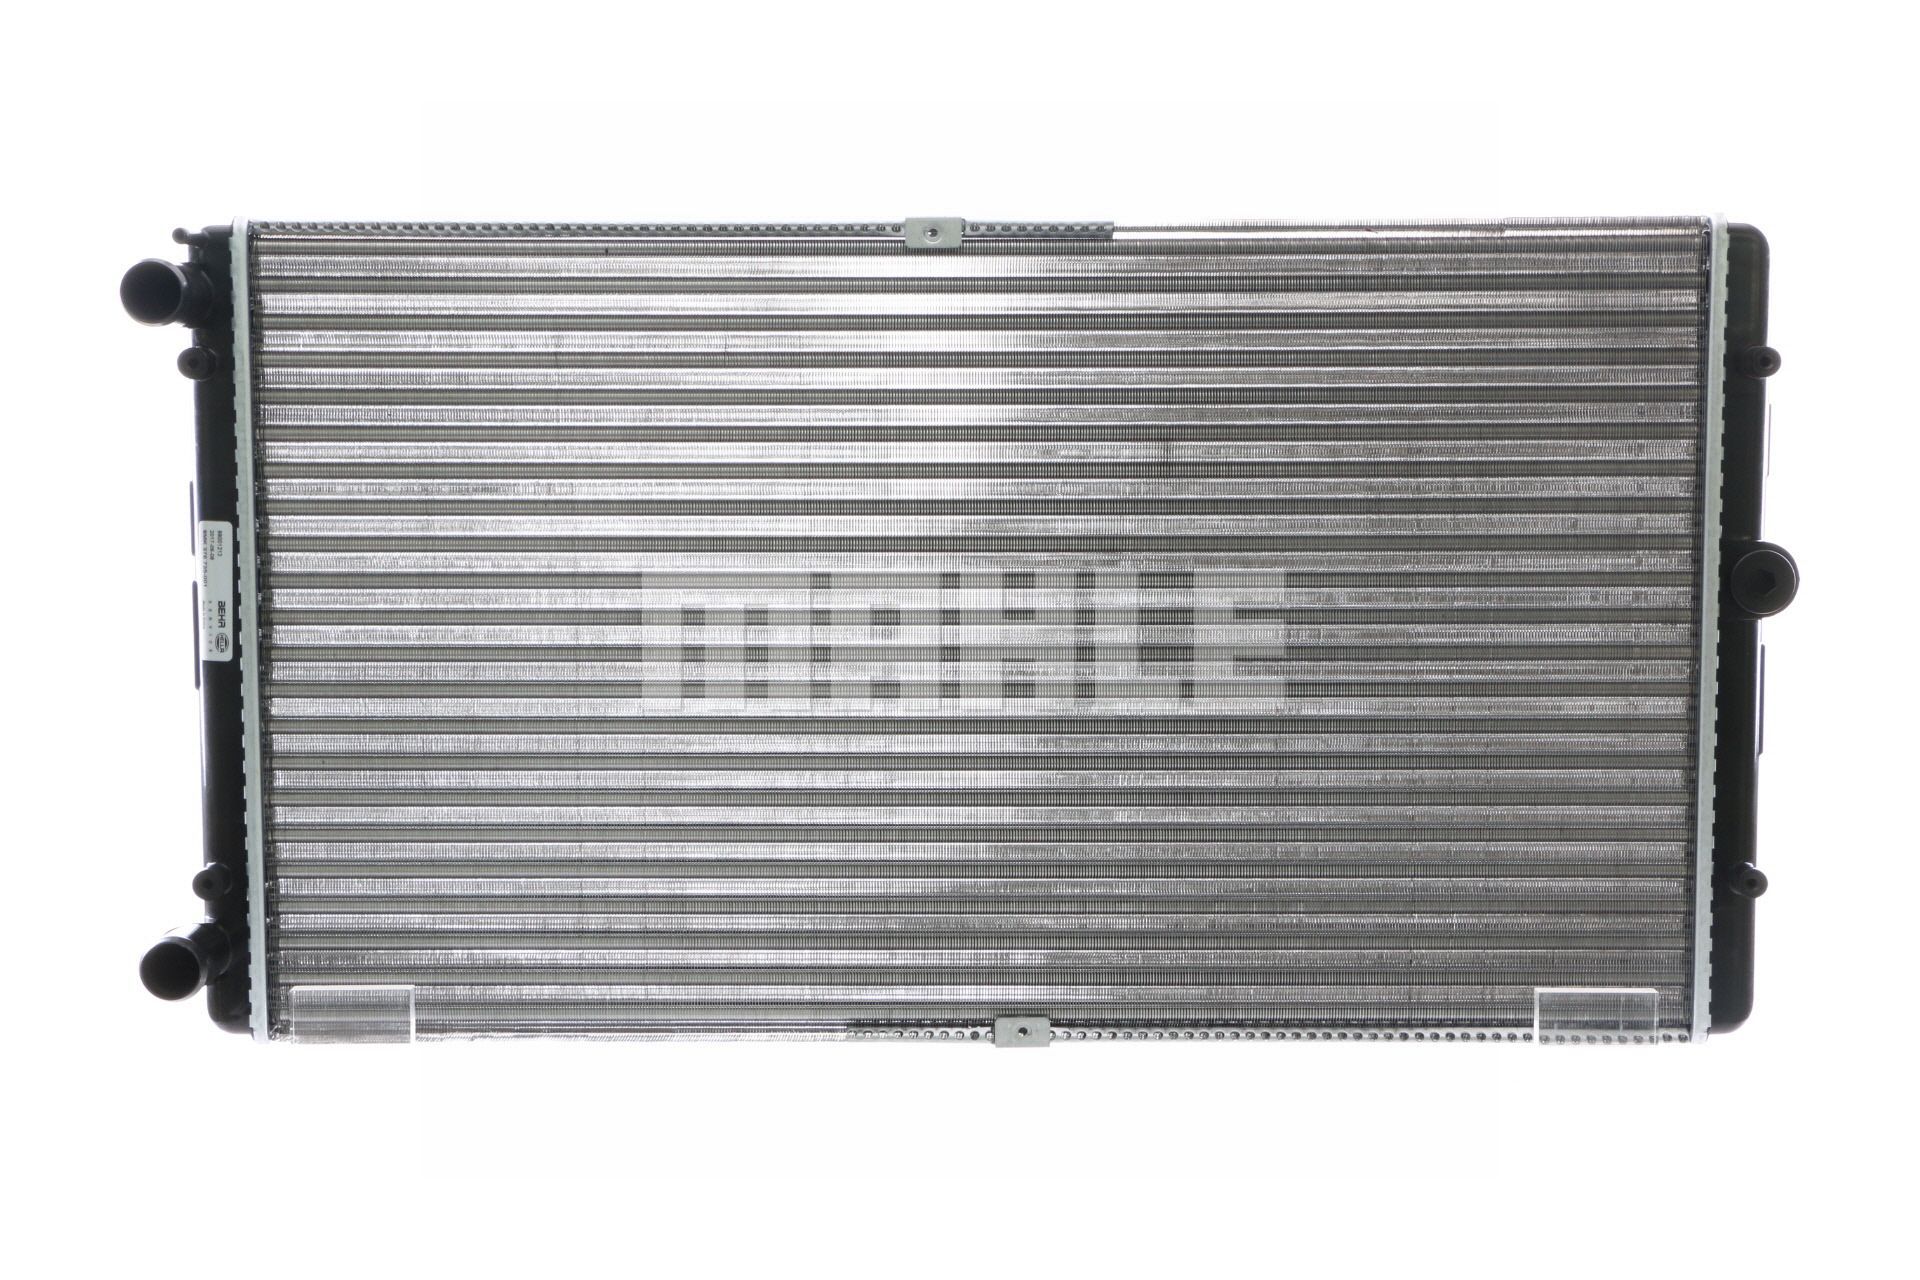 376735001 MAHLE ORIGINAL for vehicles with long front, 720 x 416 x 34 mm, Mechanically jointed cooling fins Radiator CR 829 000S buy